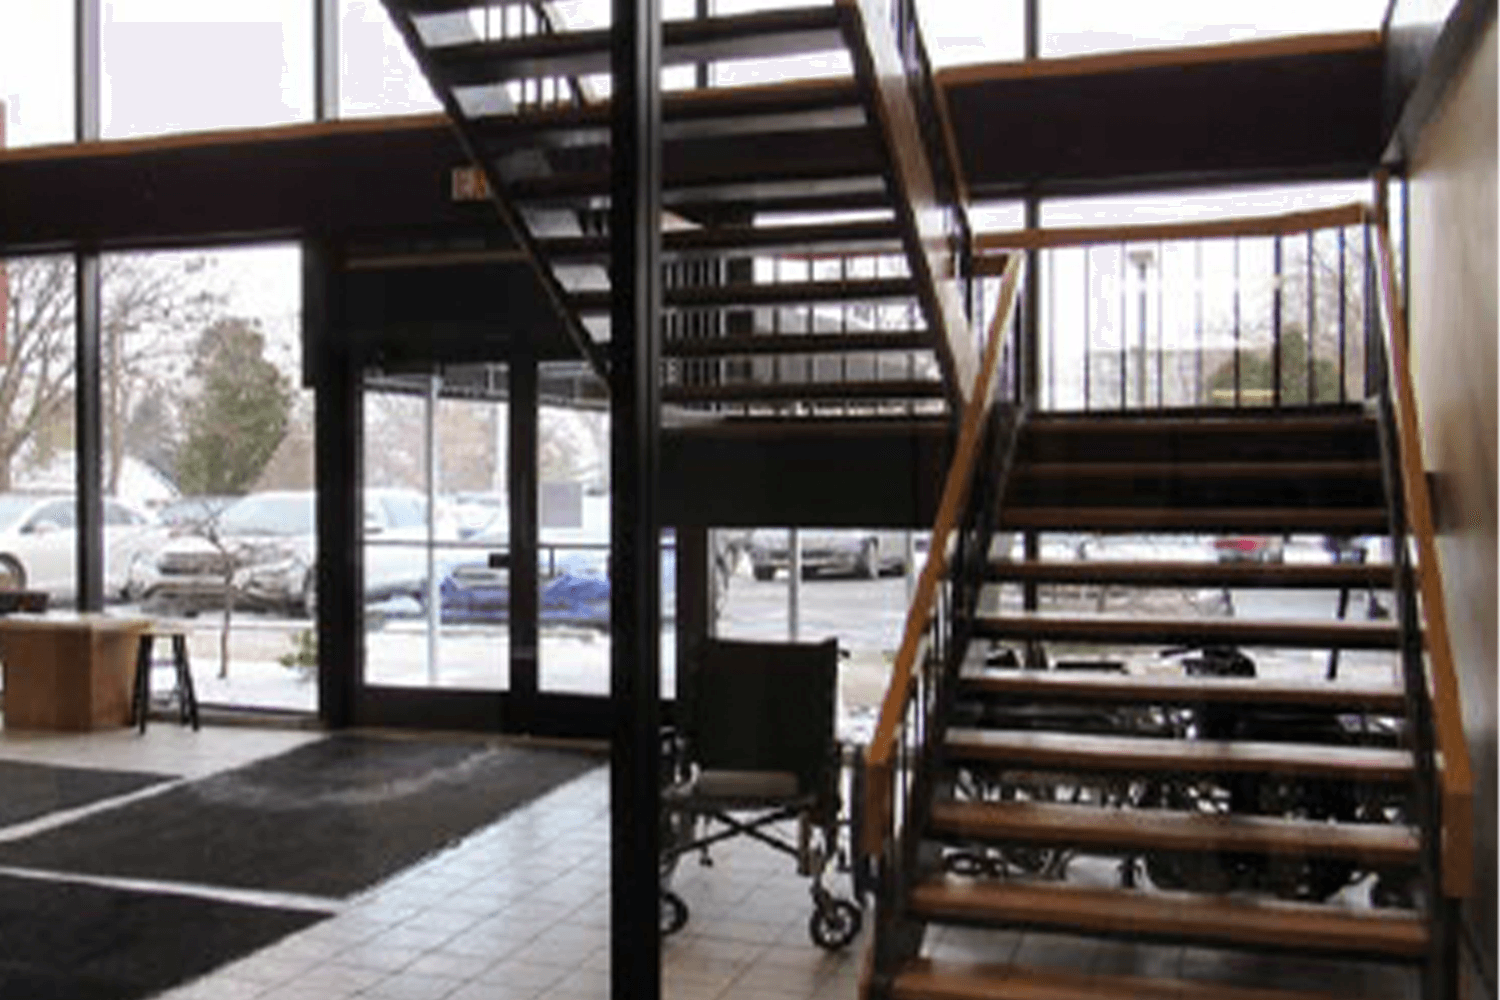 view of a stairway in a lobby area